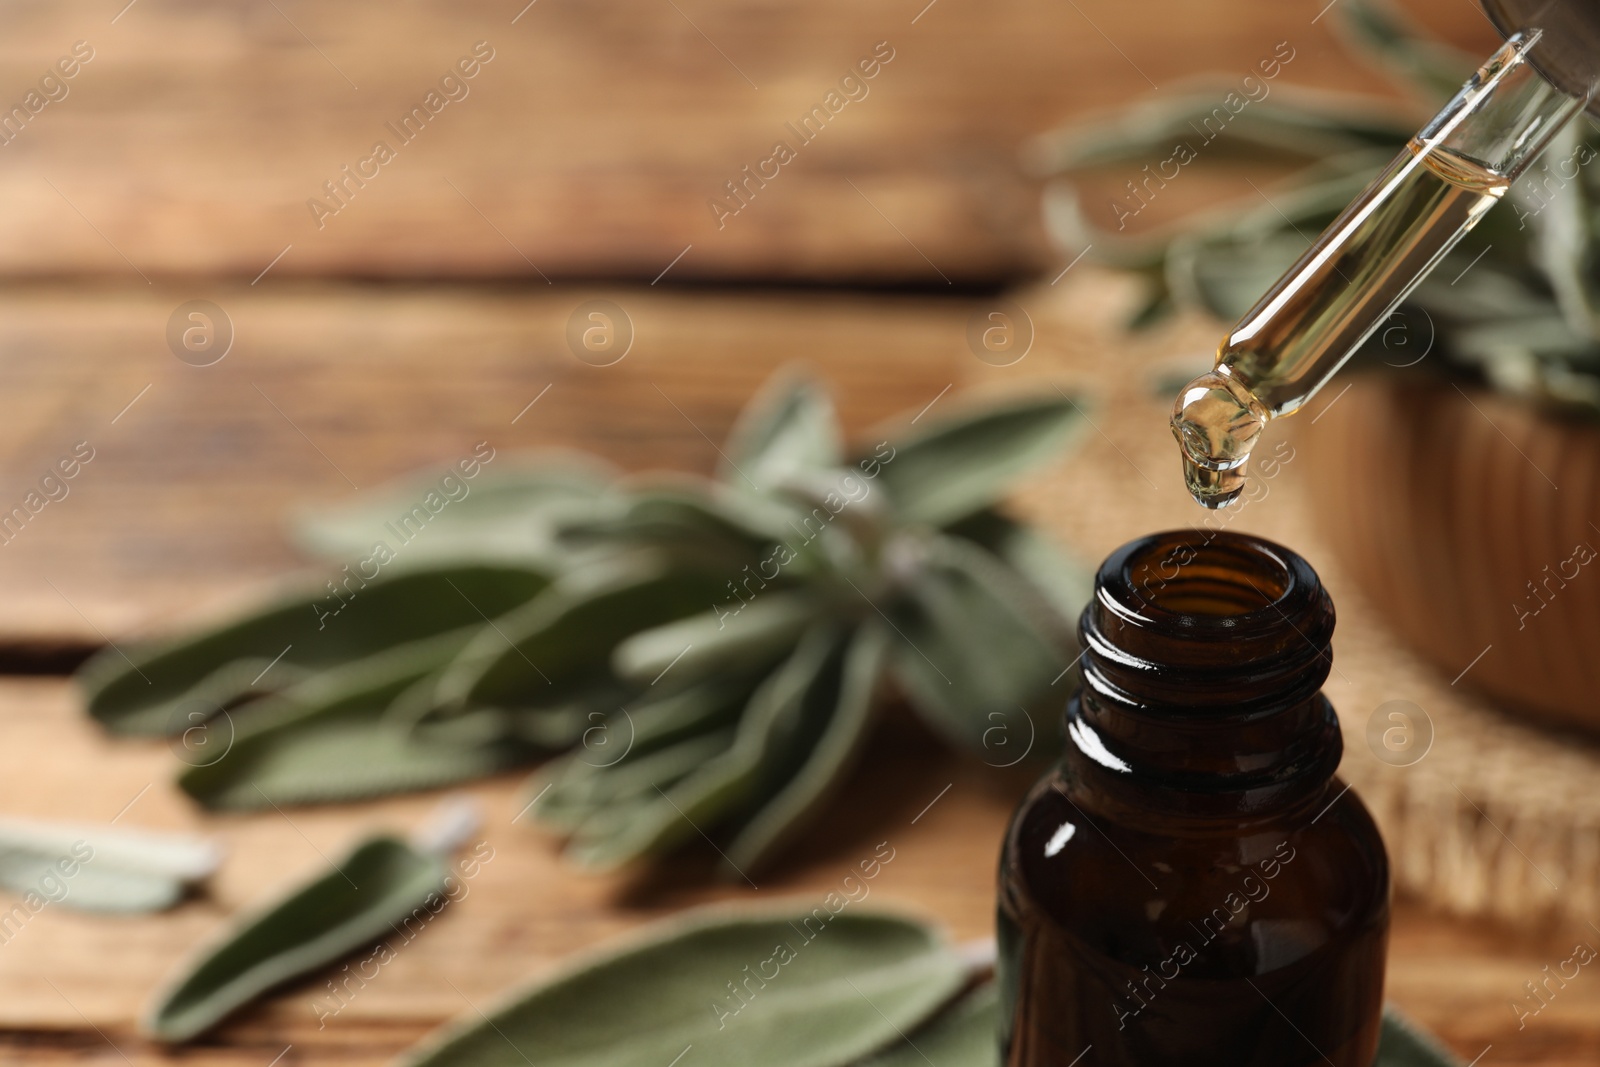 Photo of Dropping essential sage oil into bottle on blurred background, closeup. Space for text